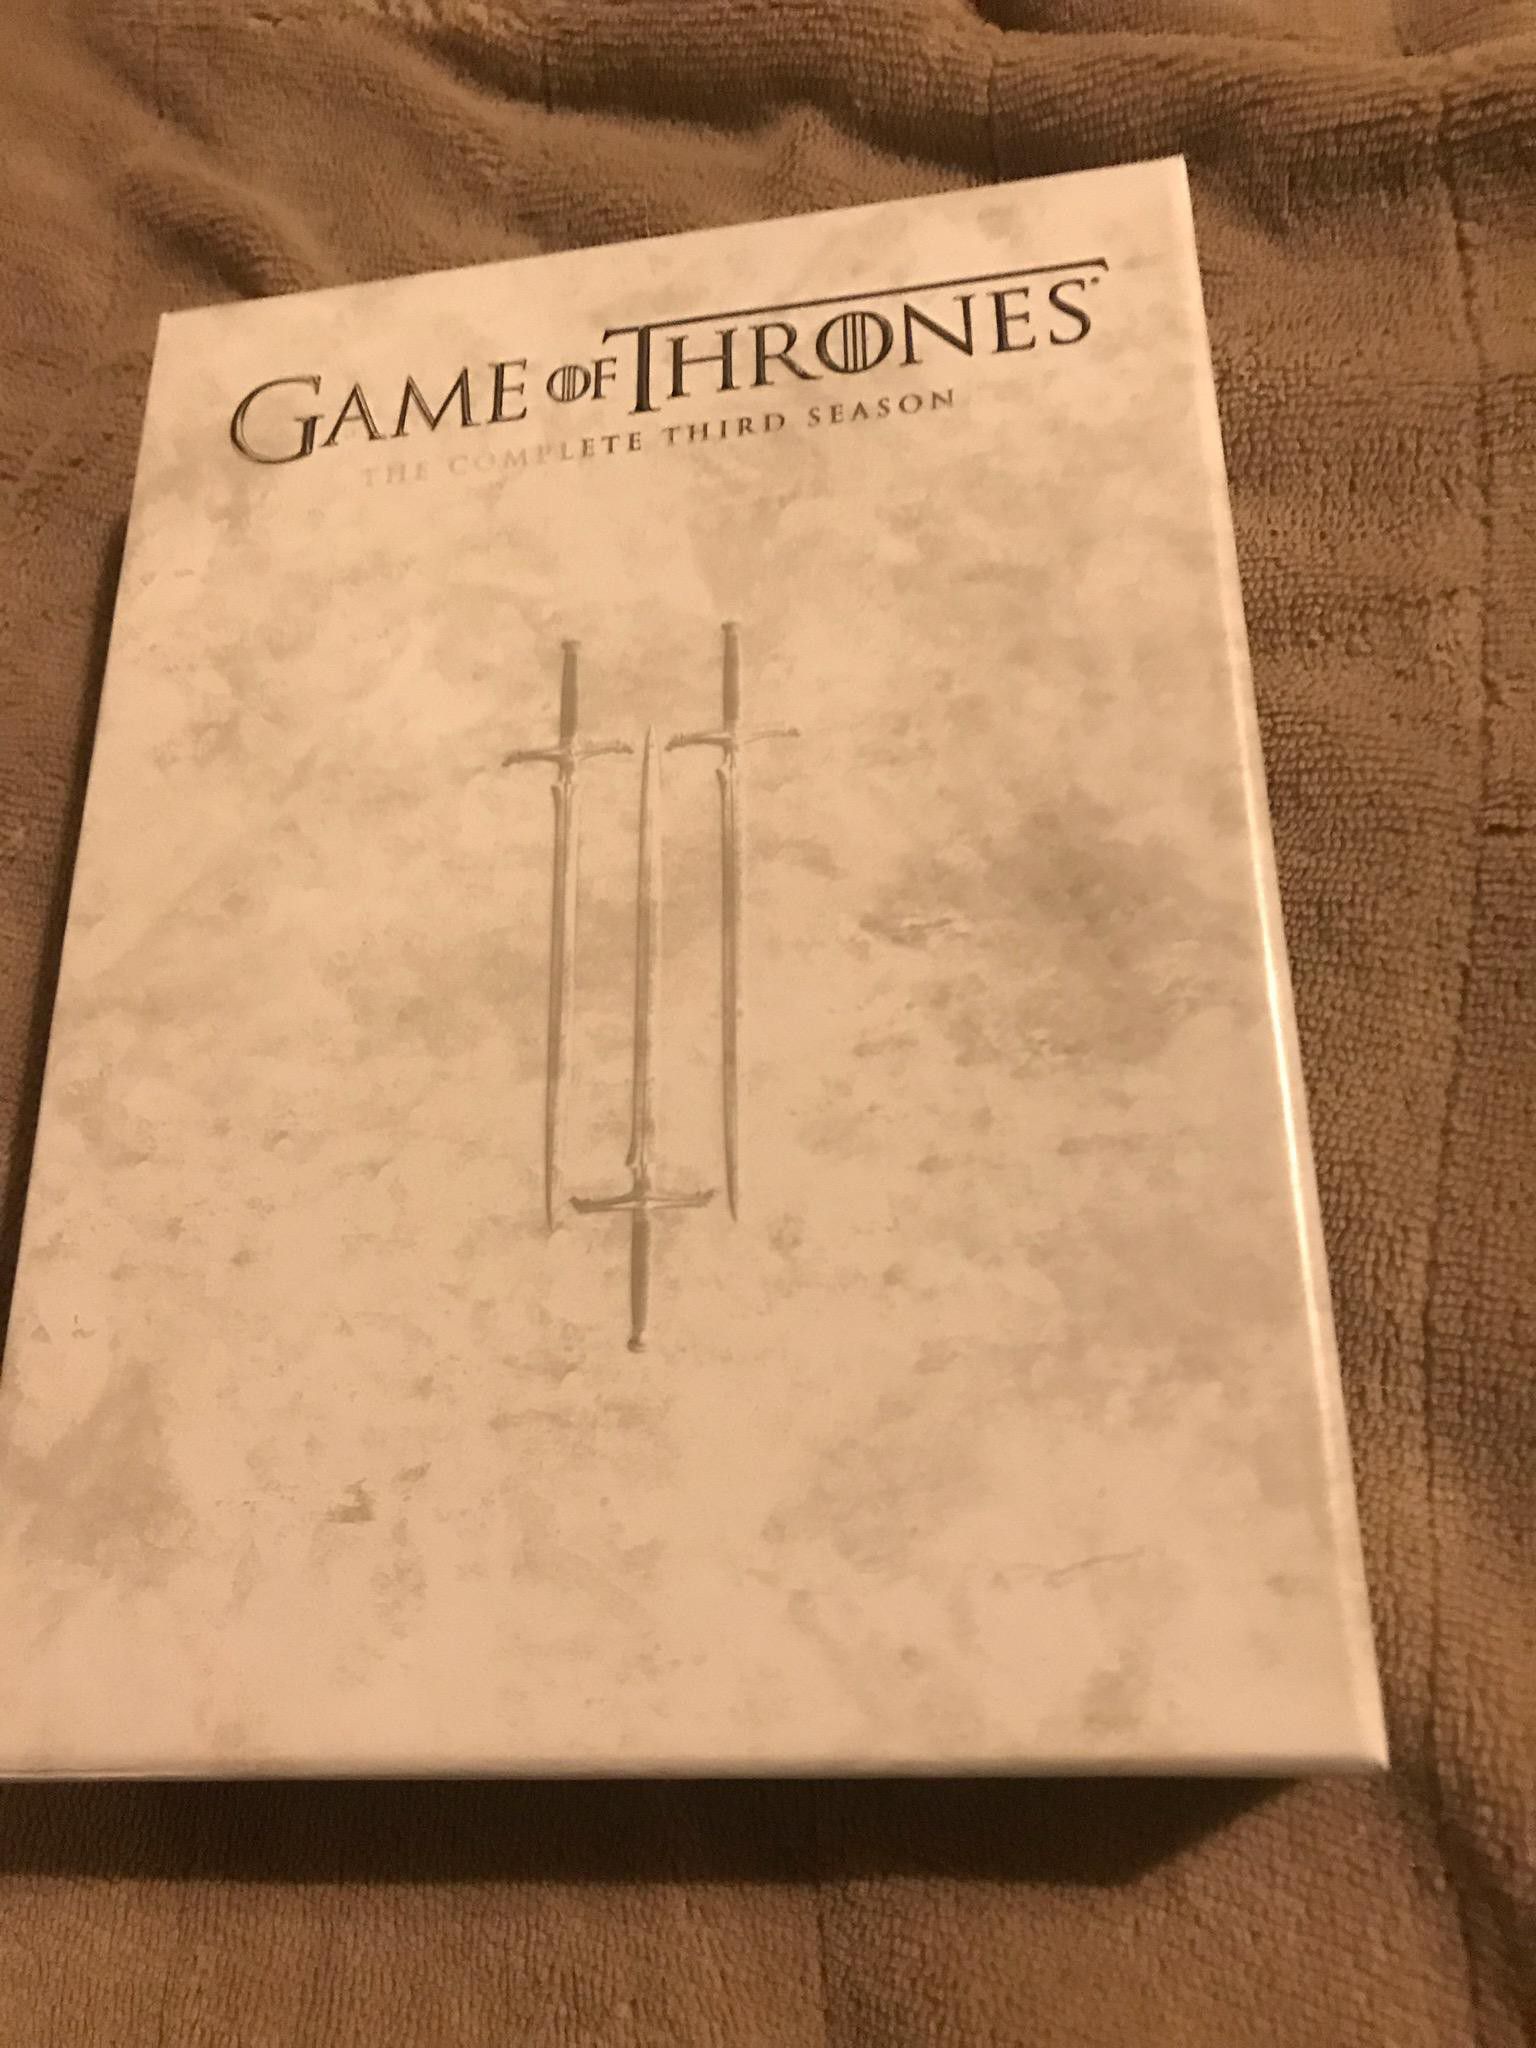 Game of Thrones The Complete Third Season DVD Used once , excellent near mint condition $5 takes it home , pickup Acton ma or ships for $3